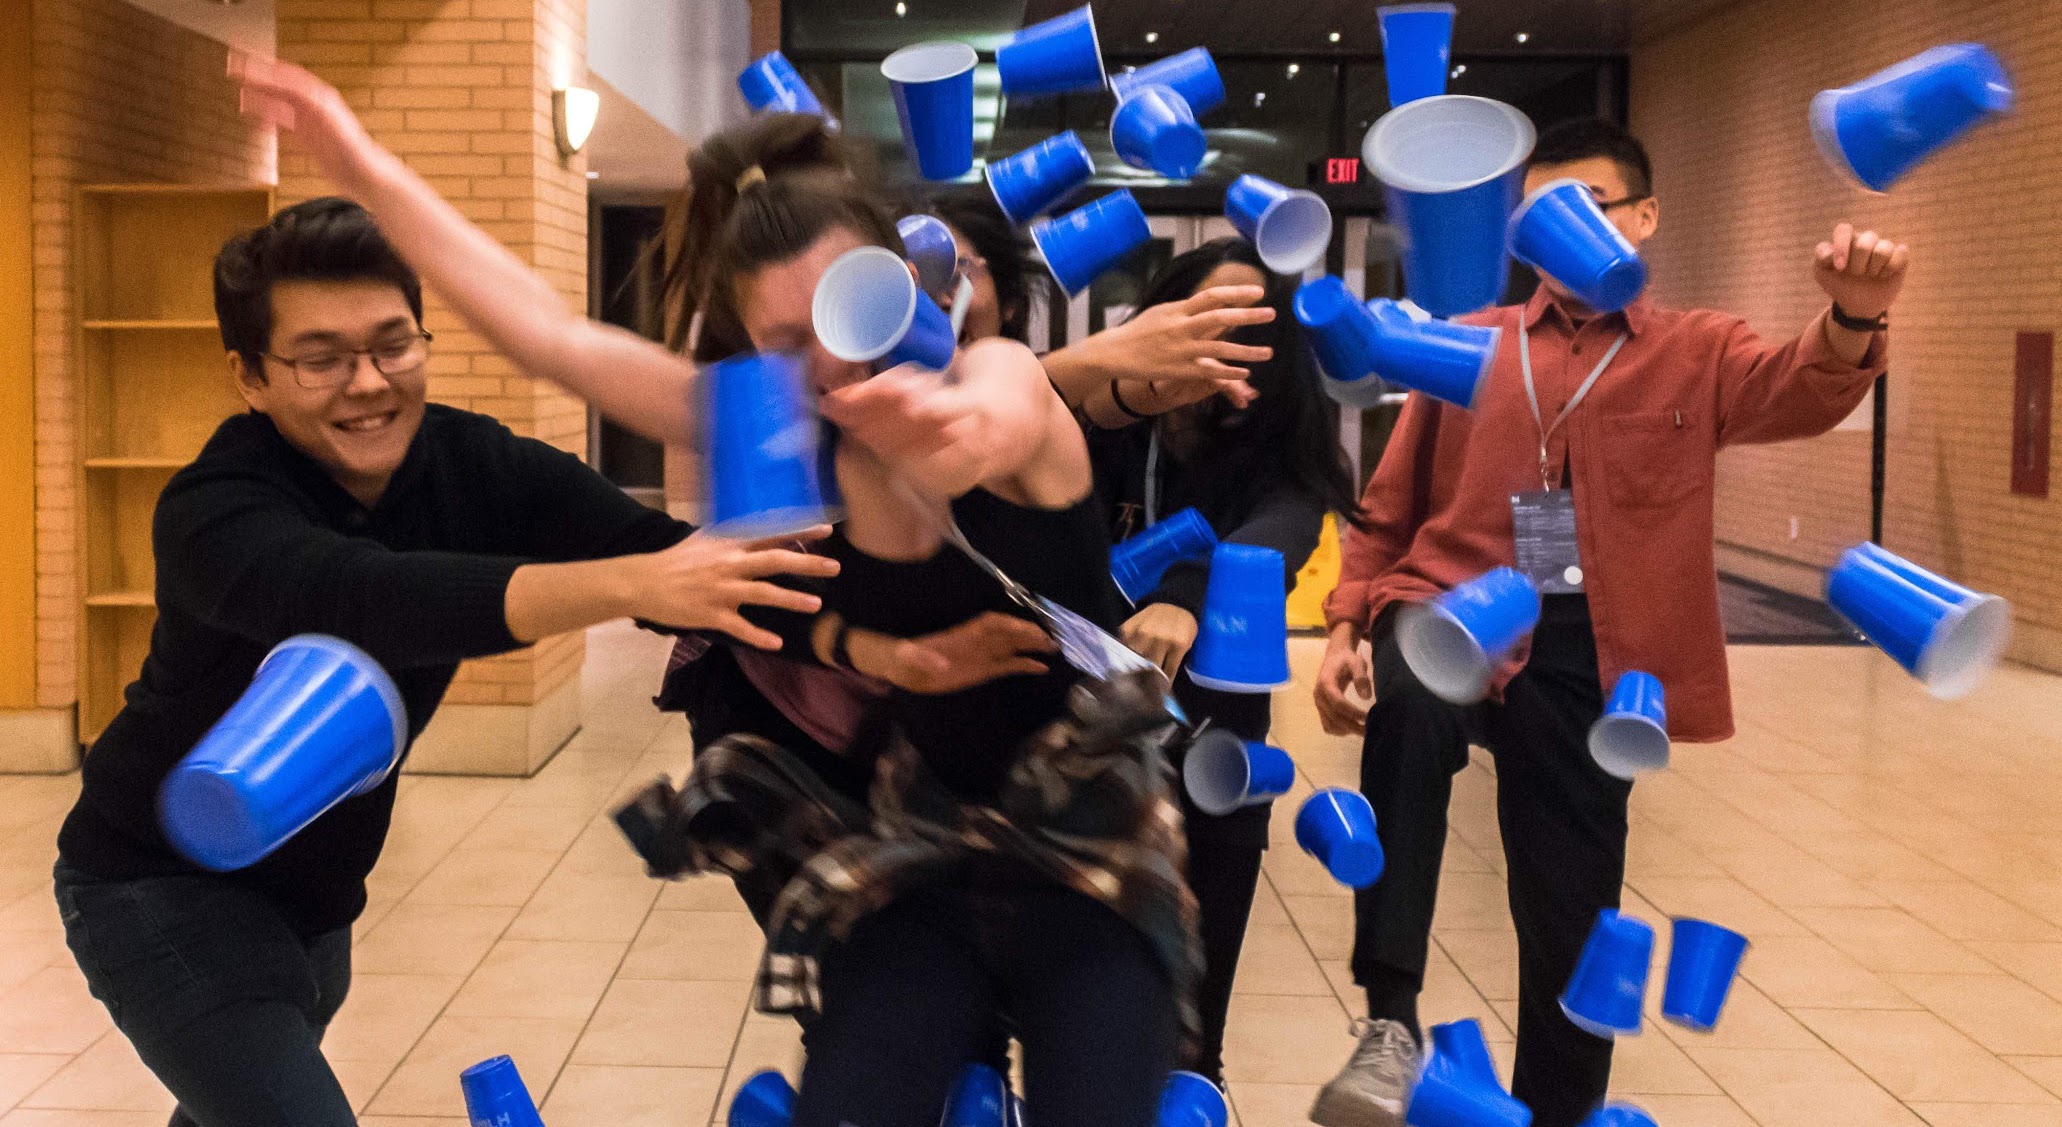 Cupstacking, a commonplace hackathon activity